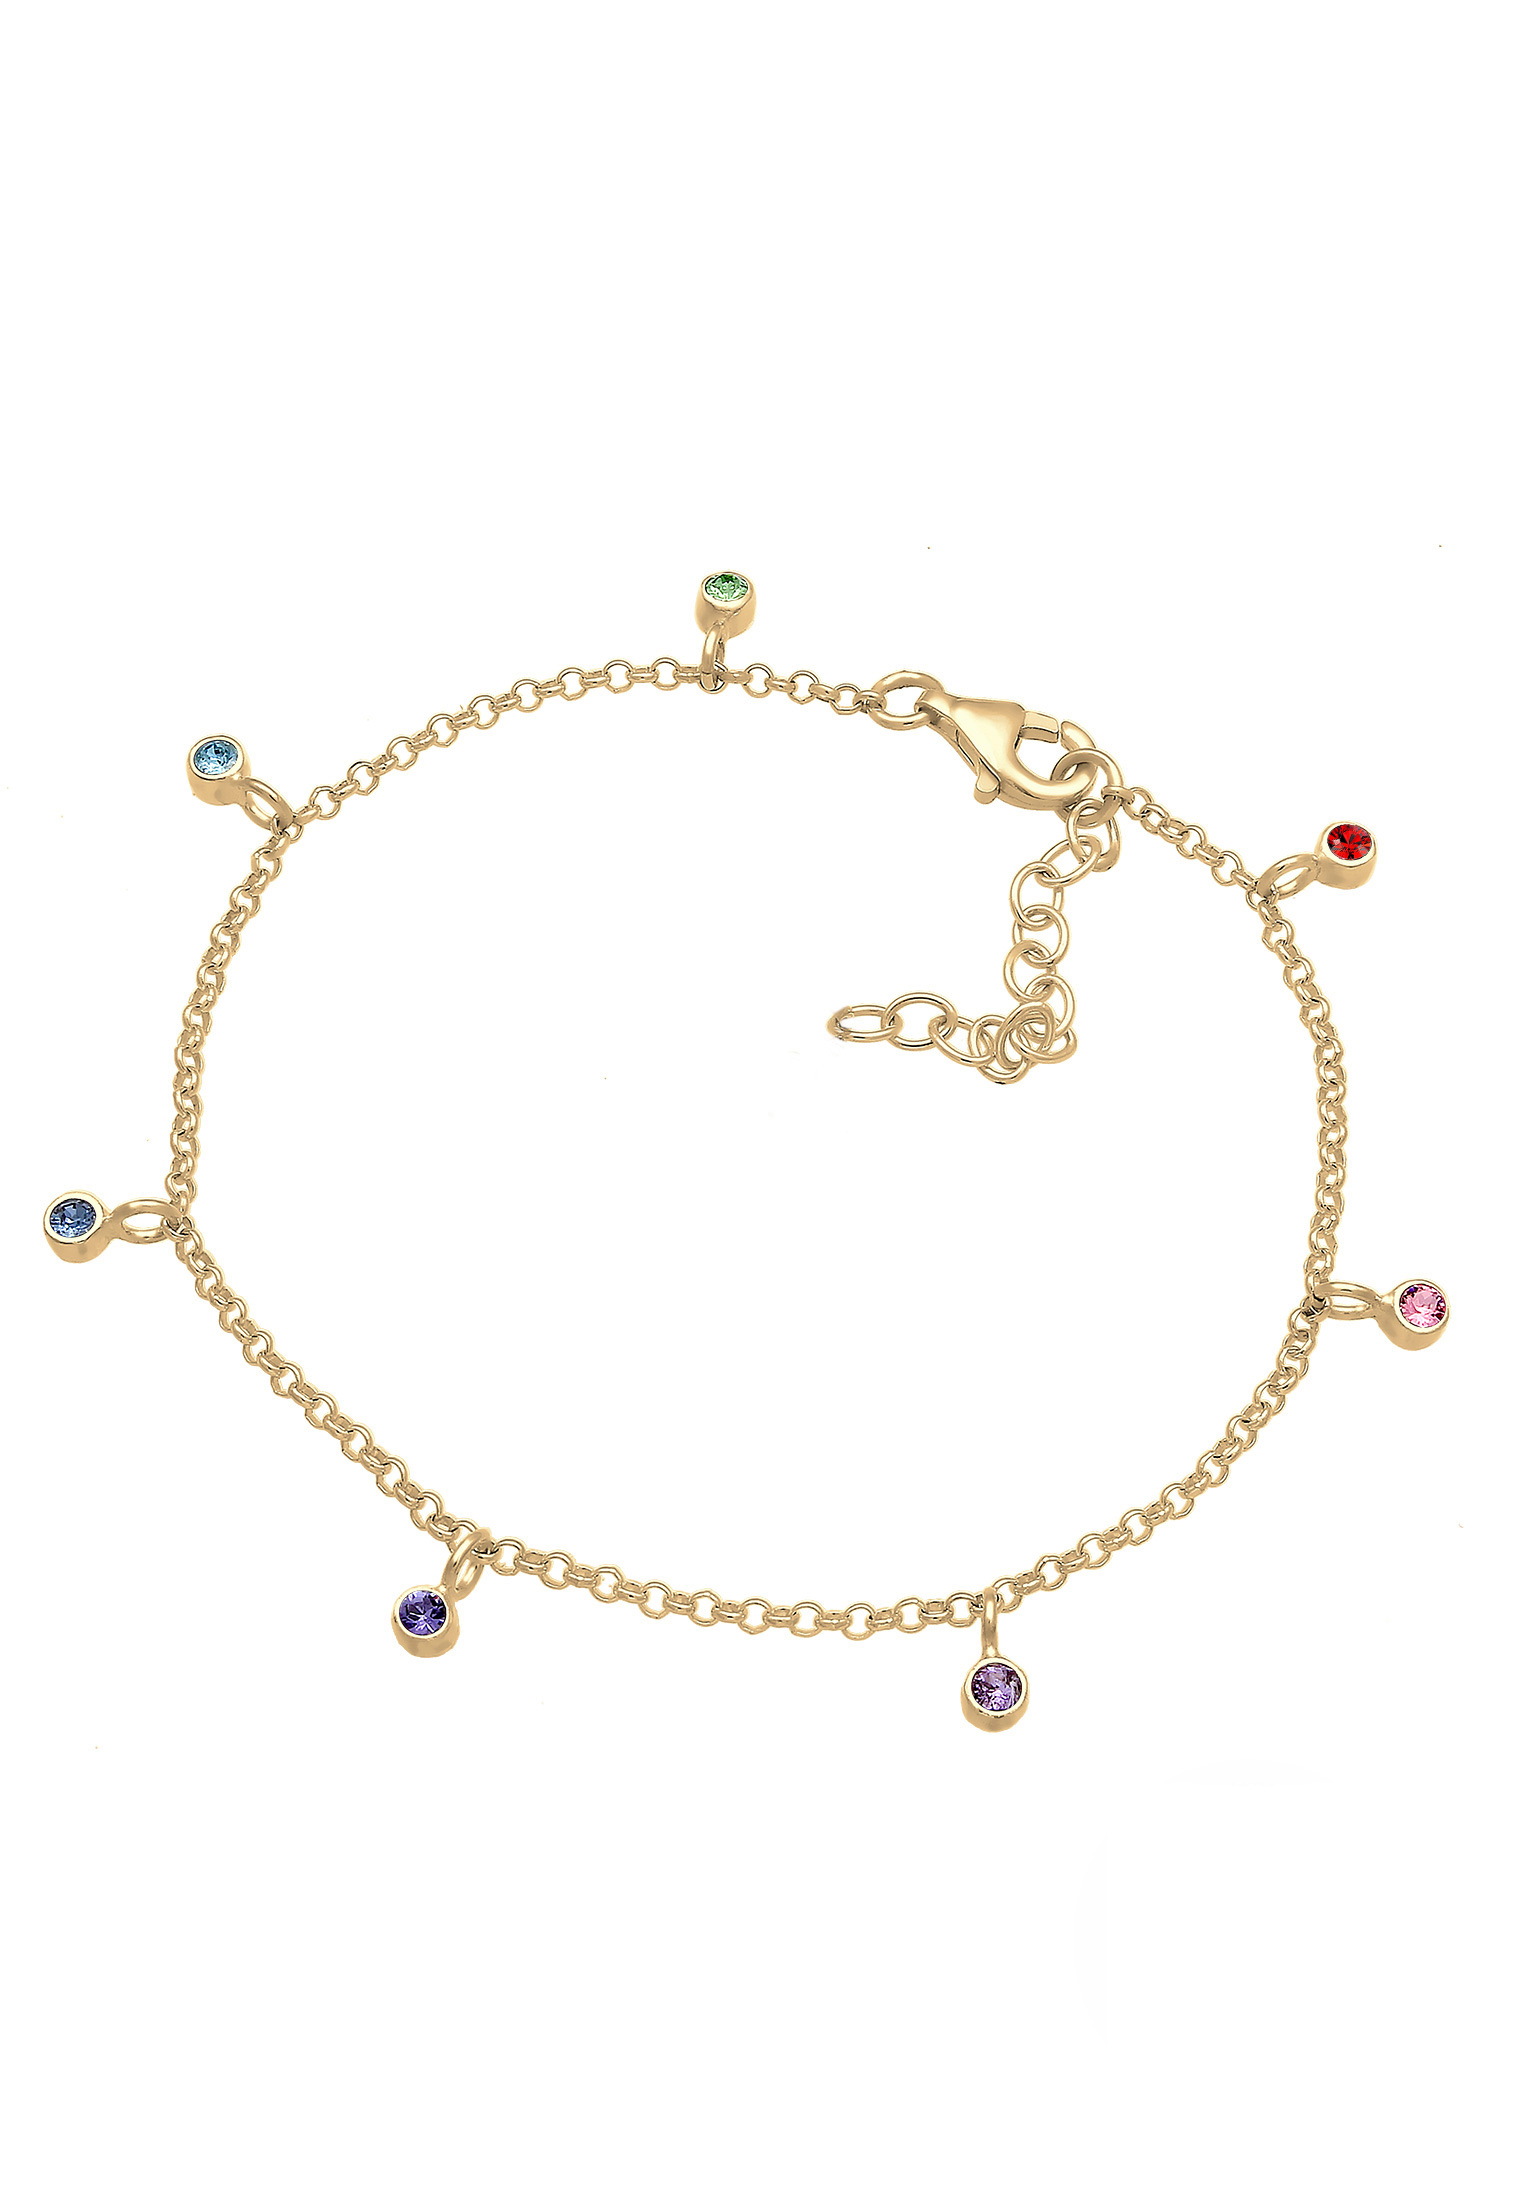 ELLI Kristall Armband in Gold 